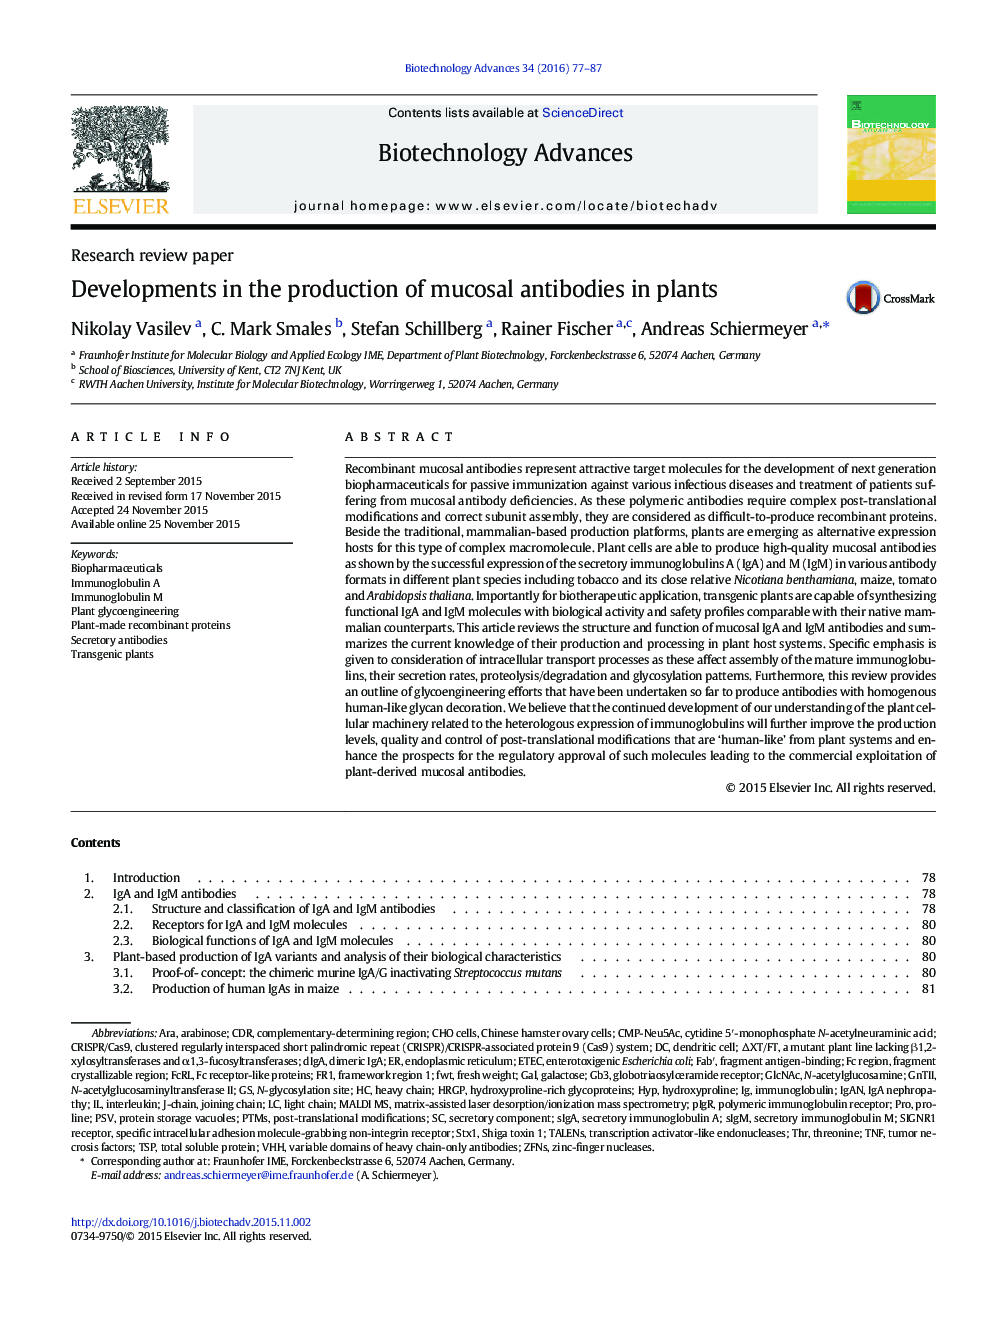 Developments in the production of mucosal antibodies in plants